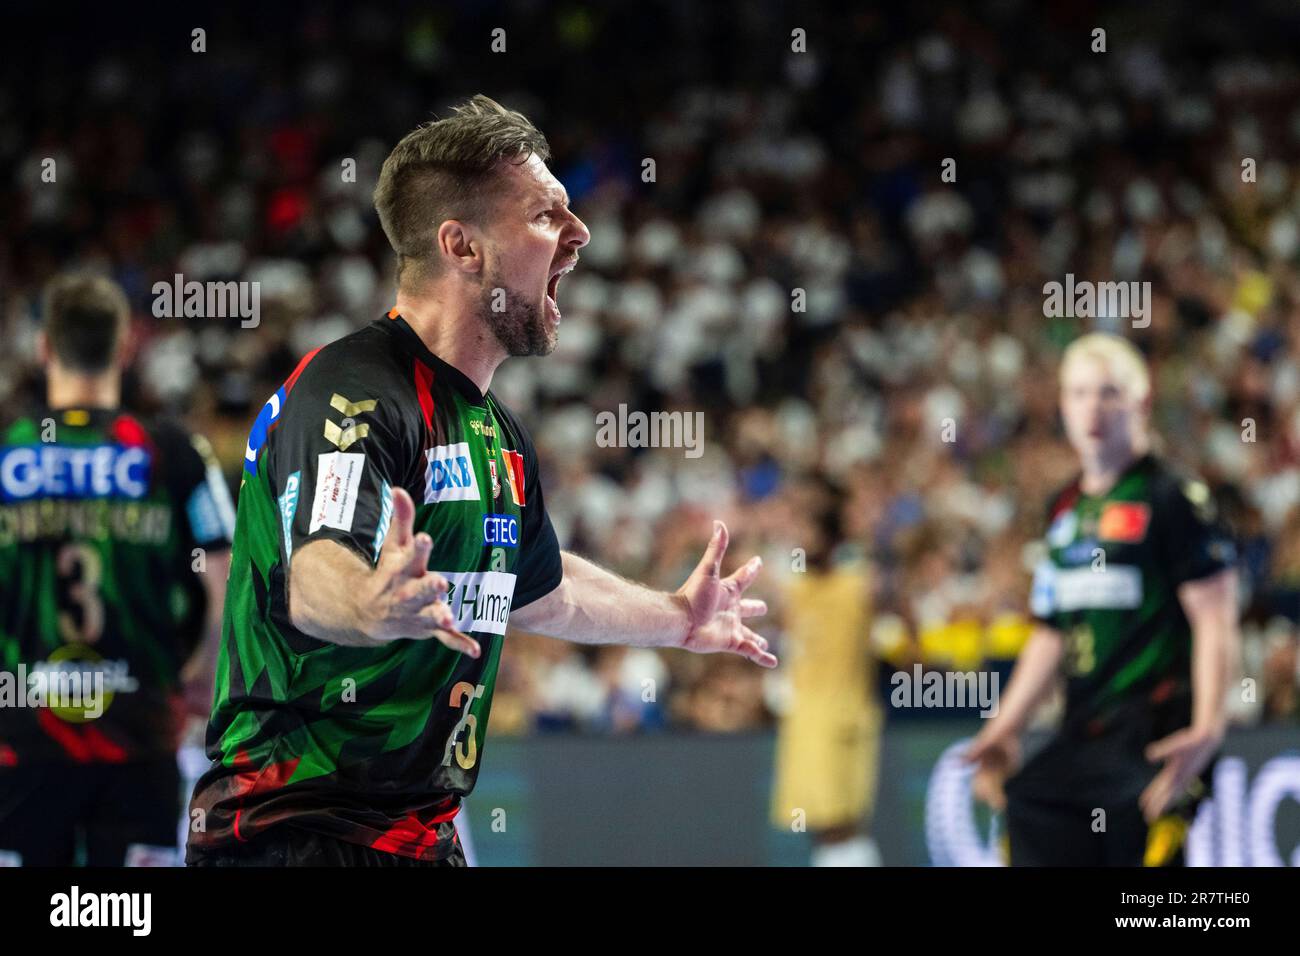 Magdeburgs Marko Bezjak cheers after scoring a goal during the Final Four Champions League handball semifinal match between SC Magdeburg and FC Barcelona at Lanxess Arena in Cologne, Germany, Saturday June 17,